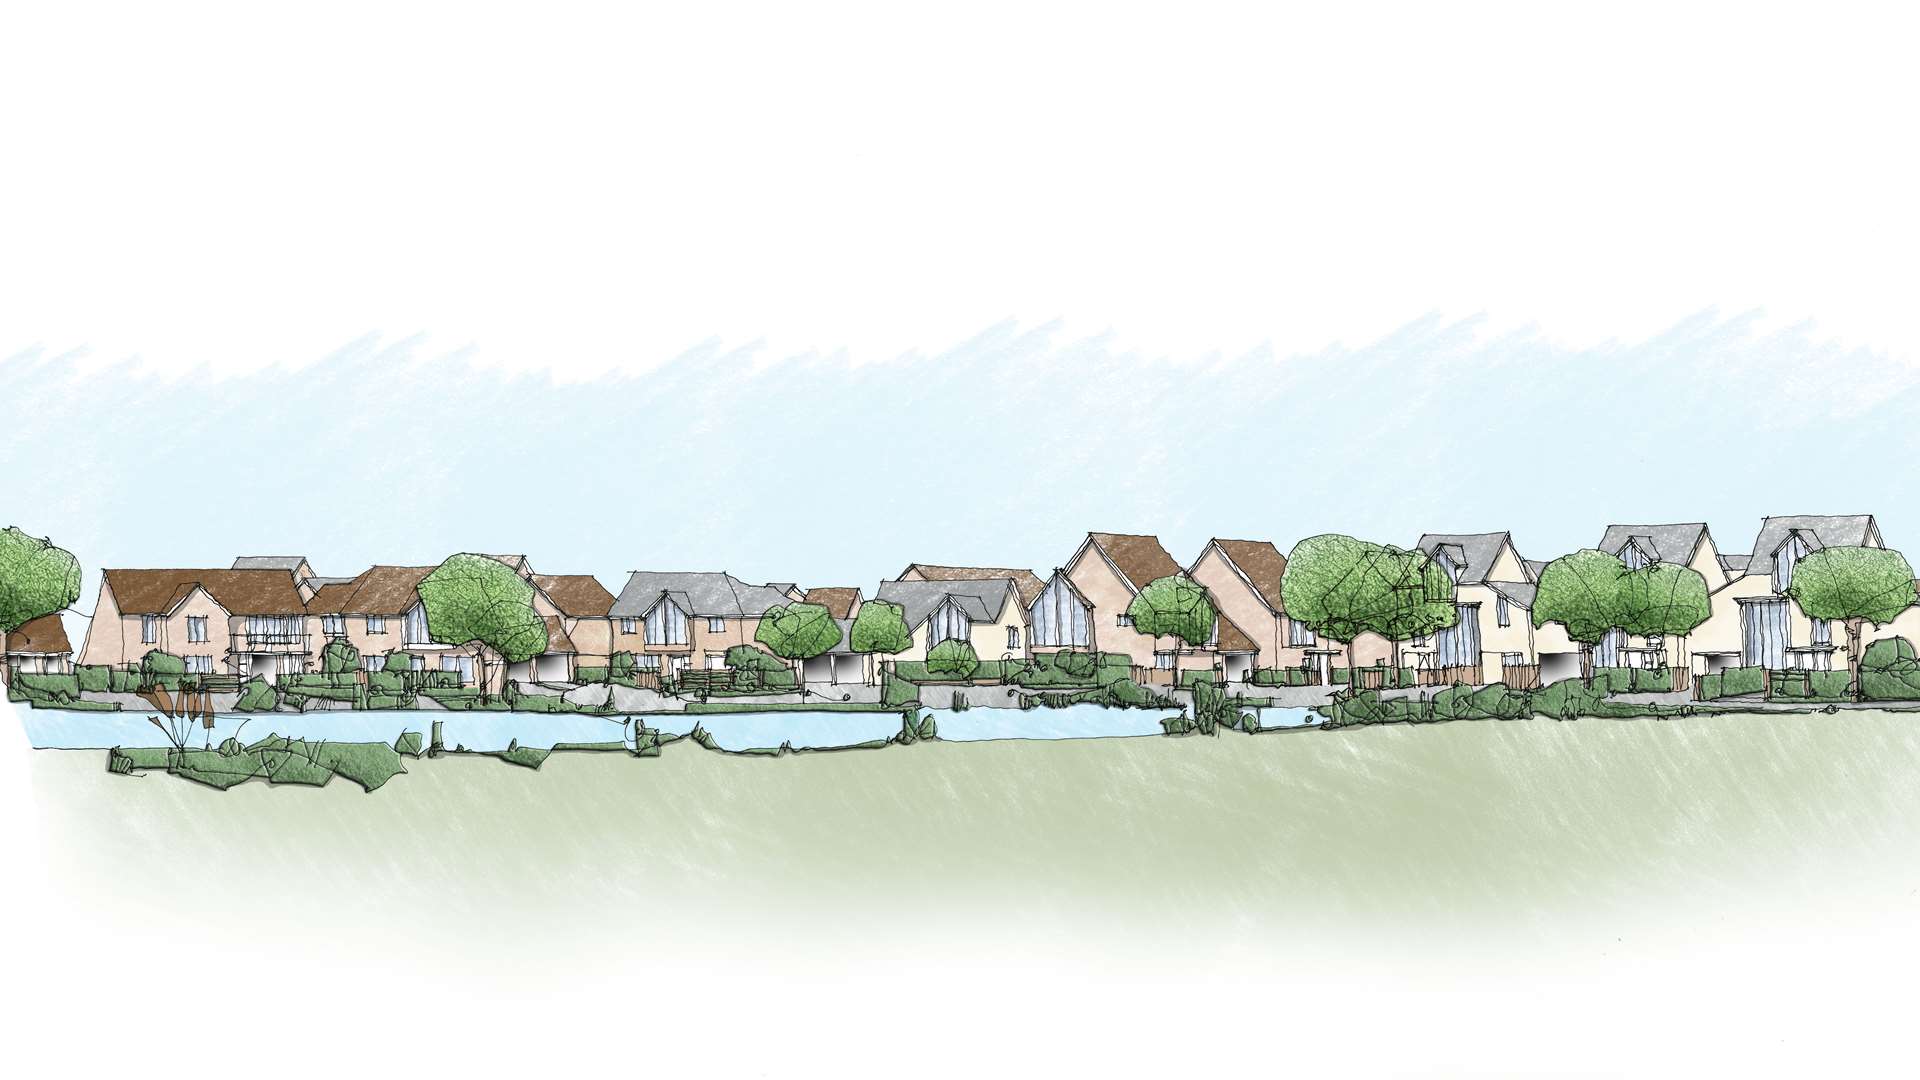 An illustration of how the Oare Lakes development could look.